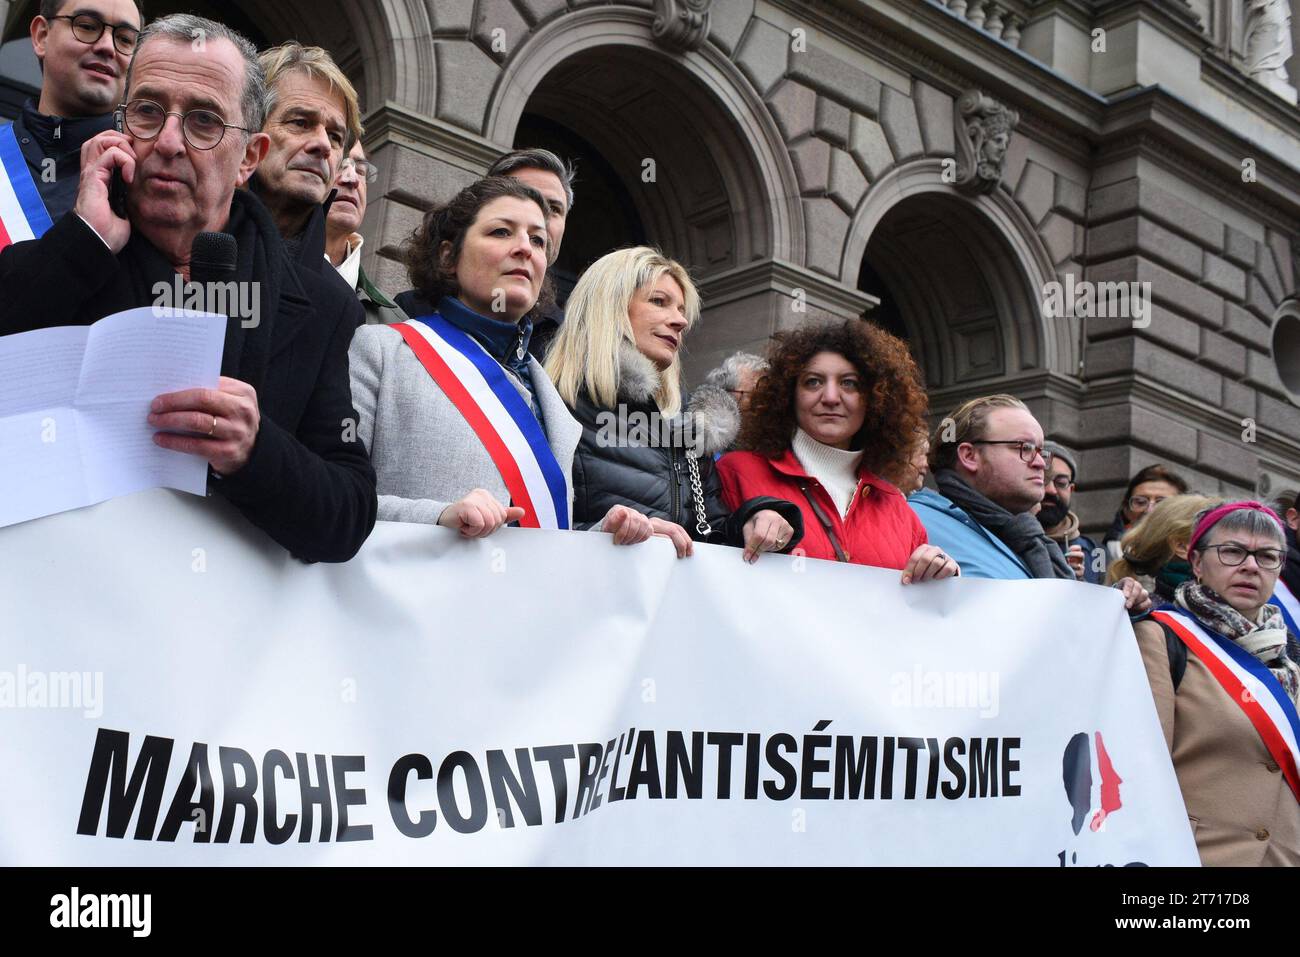 Vice-President of the Jewish Consistory of the Bas-Rhin Thierry Ross and Mayor of Strasbourg Jeanne Barseghian take part in a demonstration against anti-Semitism in Strasbourg, eastern France, on November 12, 2023. Tens of thousands marched against anti-Semitism in cities across France amid bickering by political parties over who should take part and a surge in anti-Semitic incidents across France. Tensions have been rising across France, home to large Jewish and Muslim communities, in the wake of the October 7 attack by Palestinian militant group Hamas on Israel, followed by a month of Israel Stock Photo